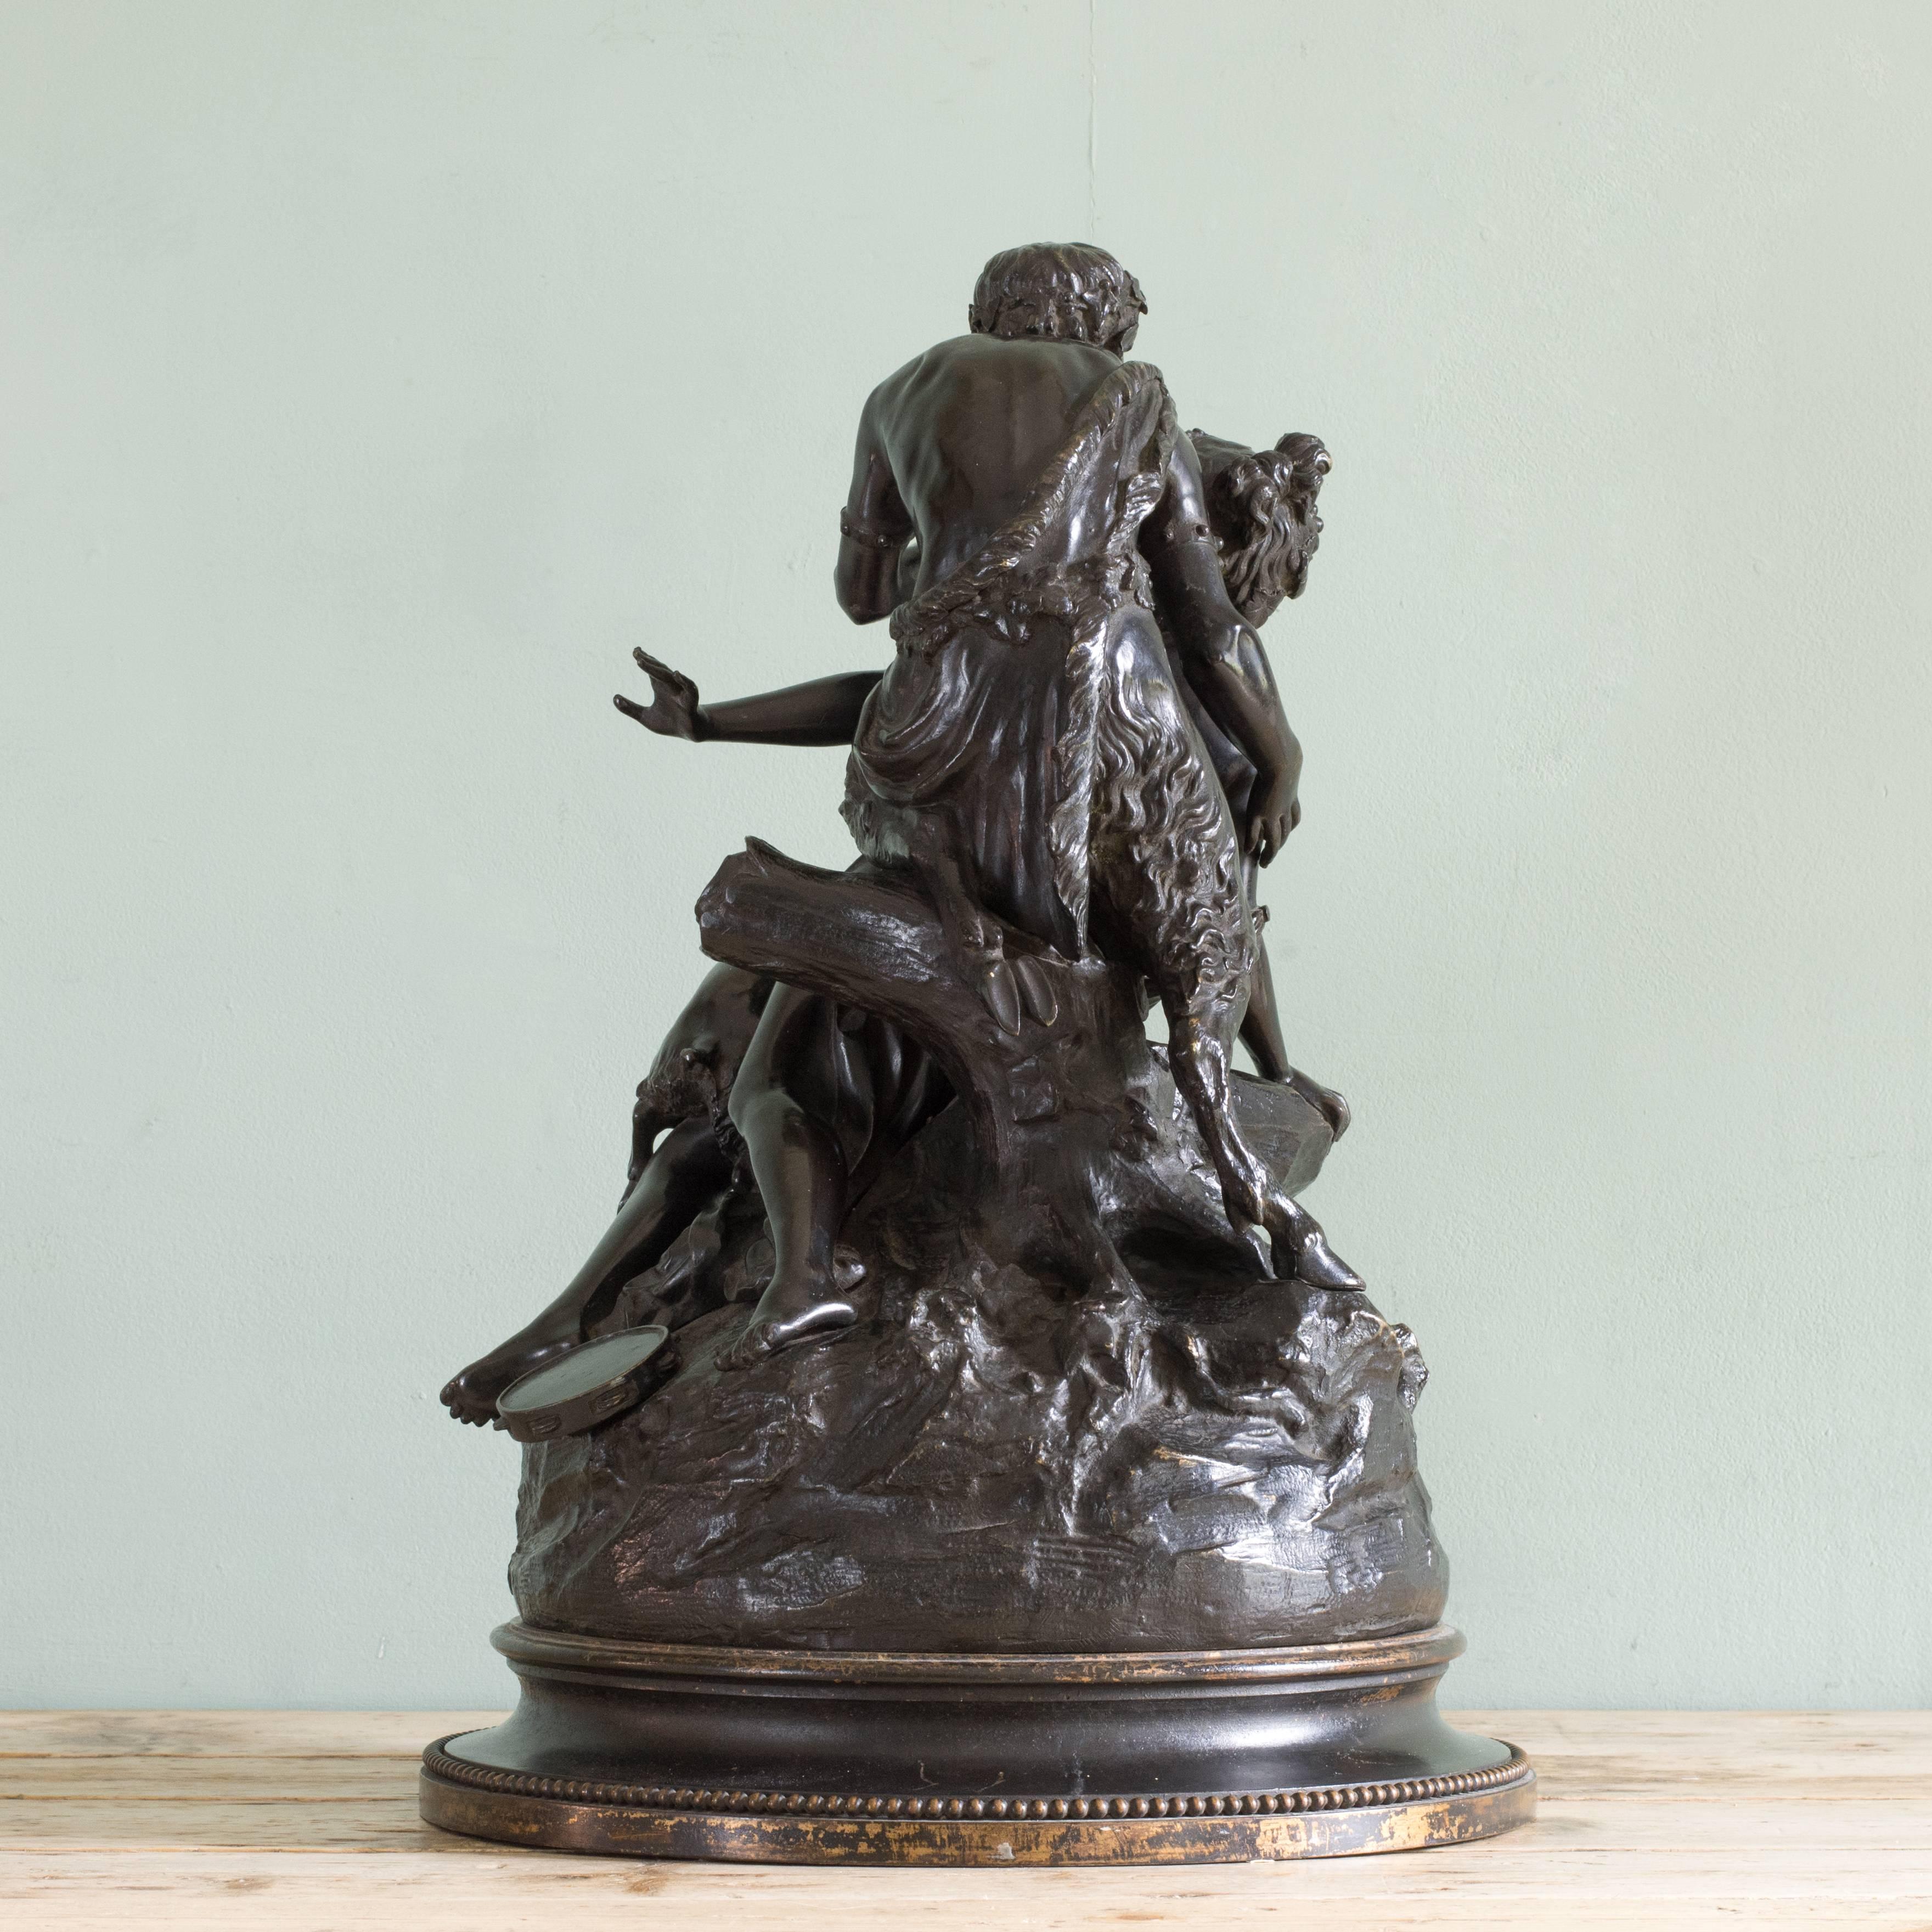 A late 19th century bronze of a Nymph, Satyr and Putti, after Claude Michel 'Clodion', on circular base, circa 1875, signed Clodion.

Dimensions: 53.5cm (21